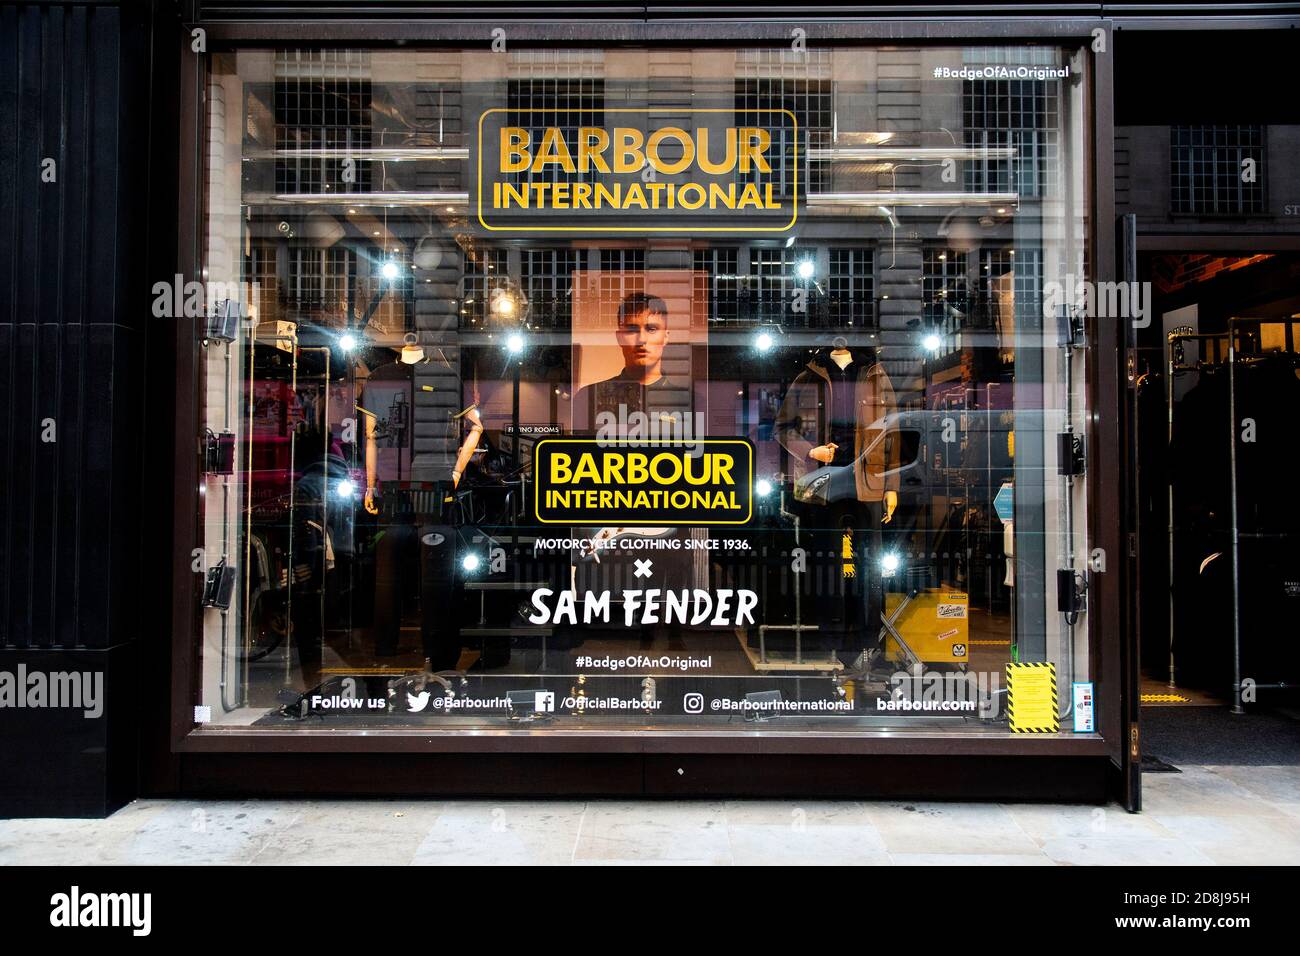 Barbour International Clothing Store, 53% OFF | www.hrccu.org